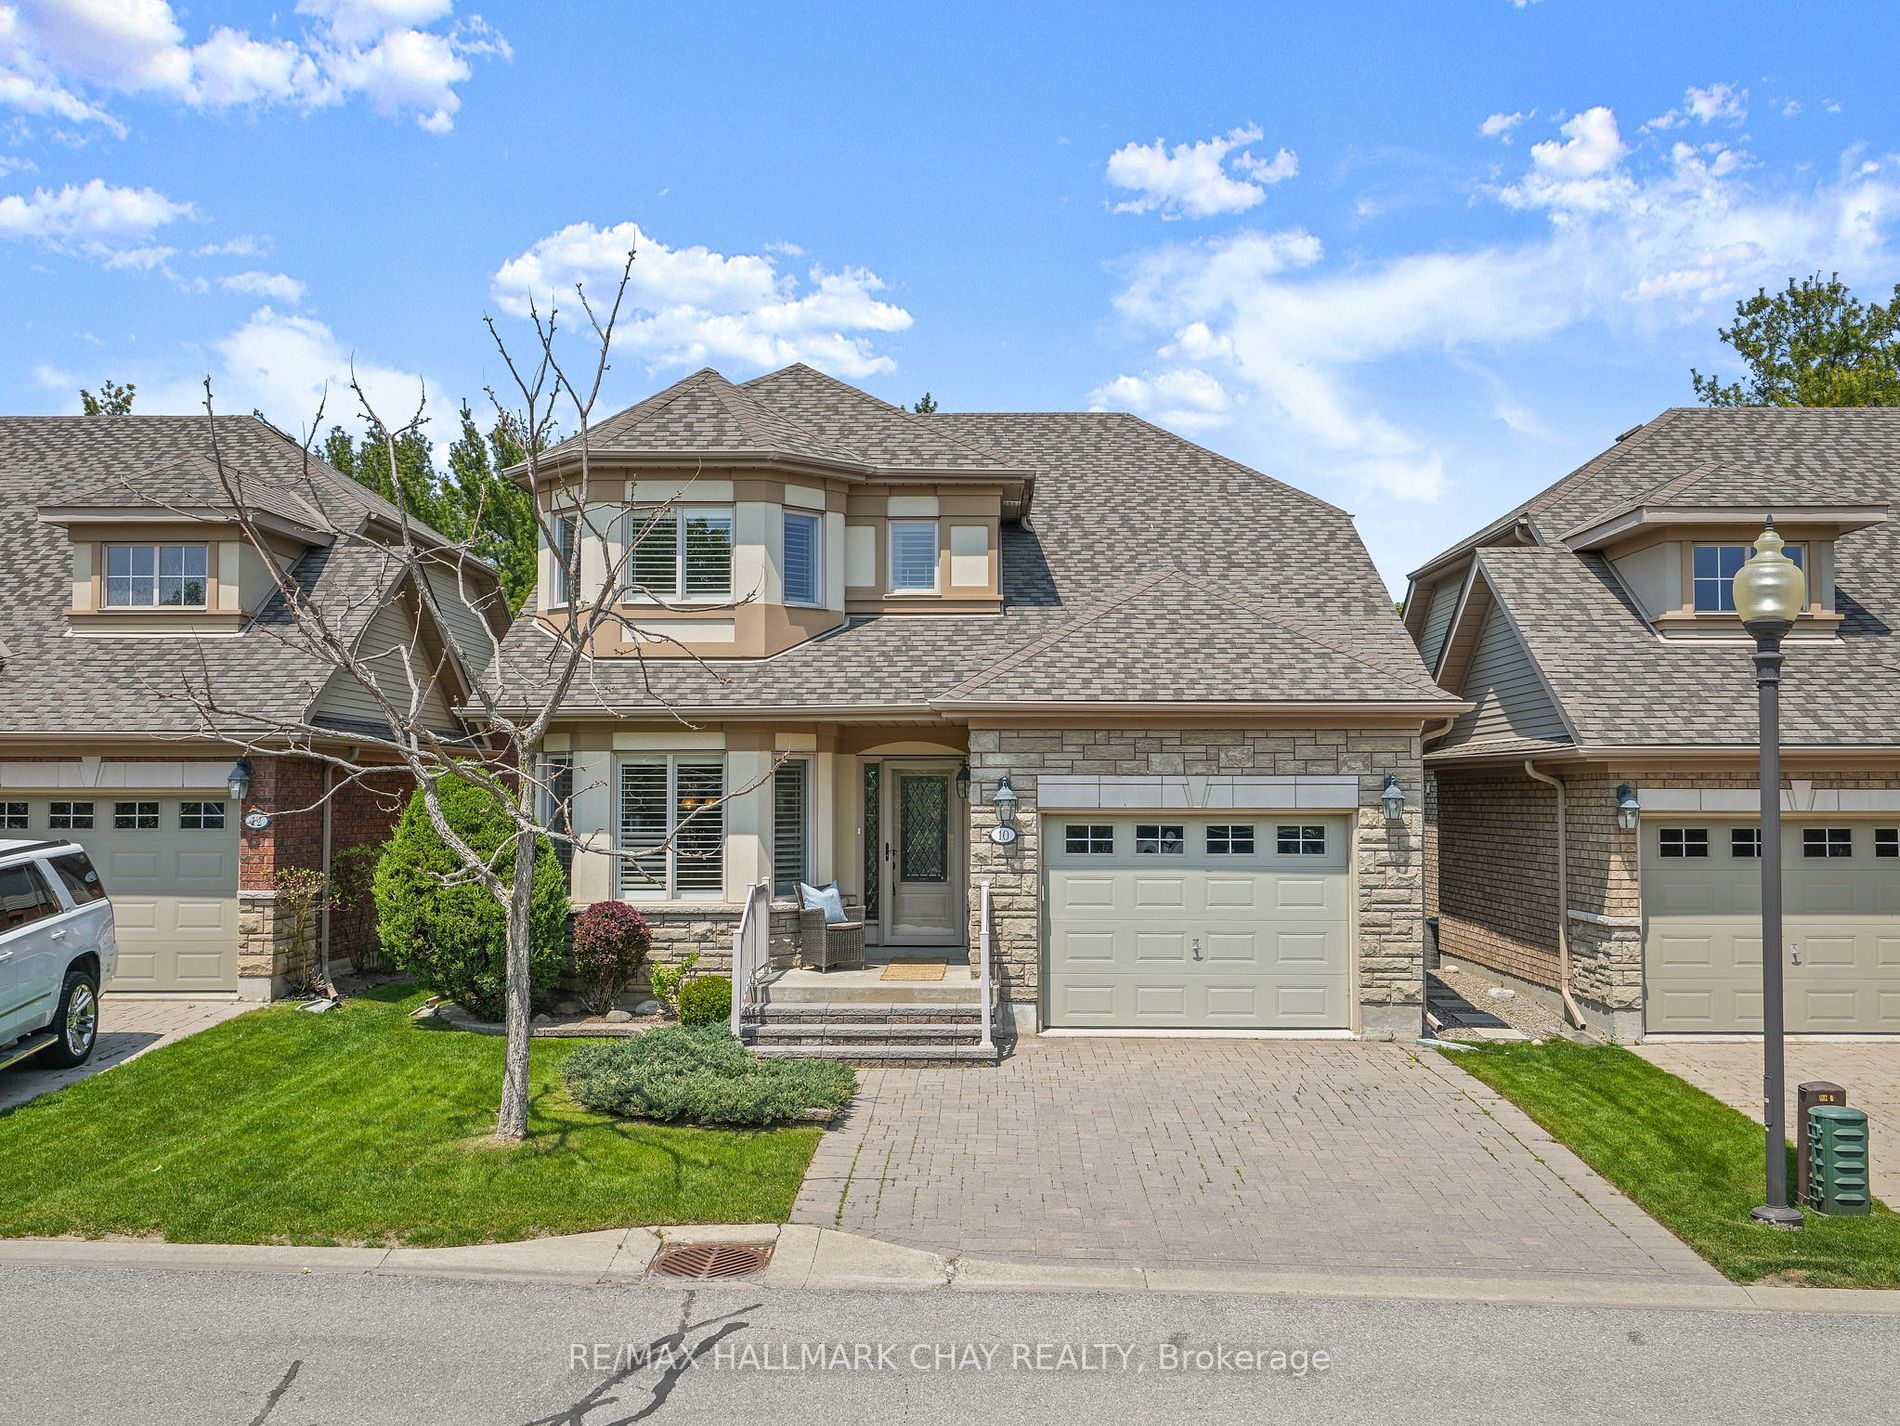 I have sold a property at 10 Tuscany Grande in New Tecumseth
